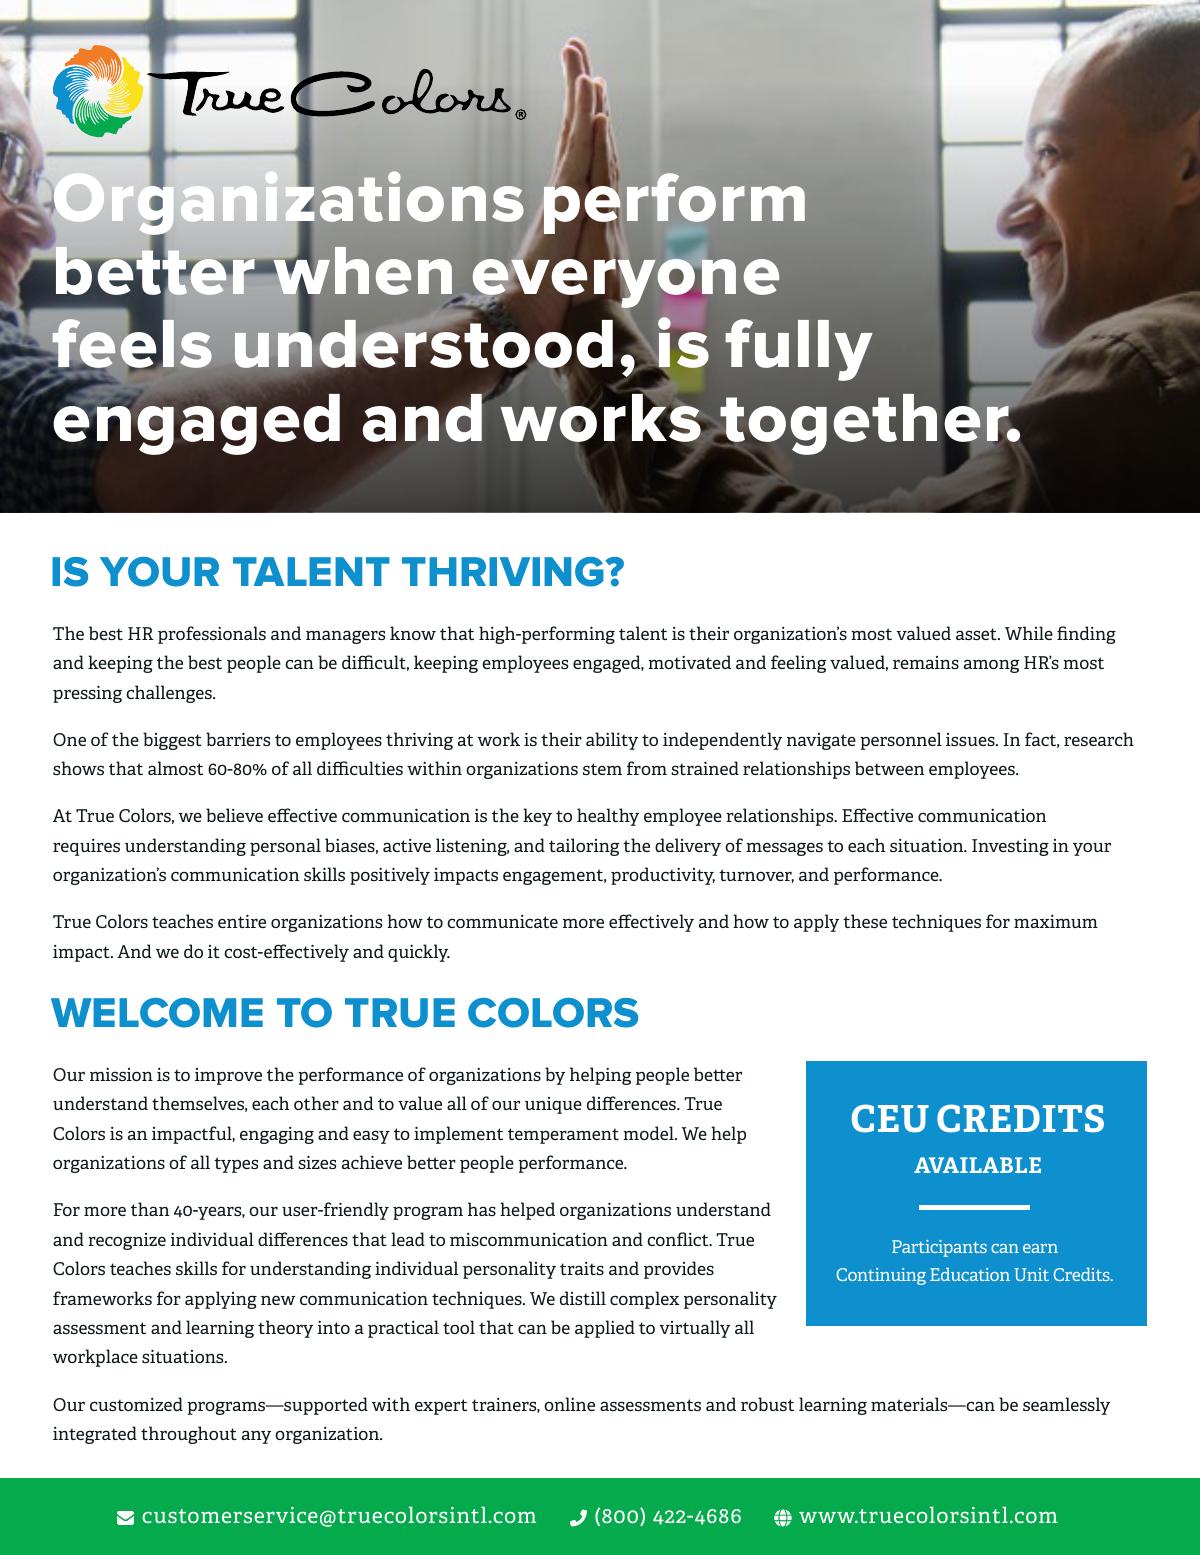 Is your Talent Thriving?